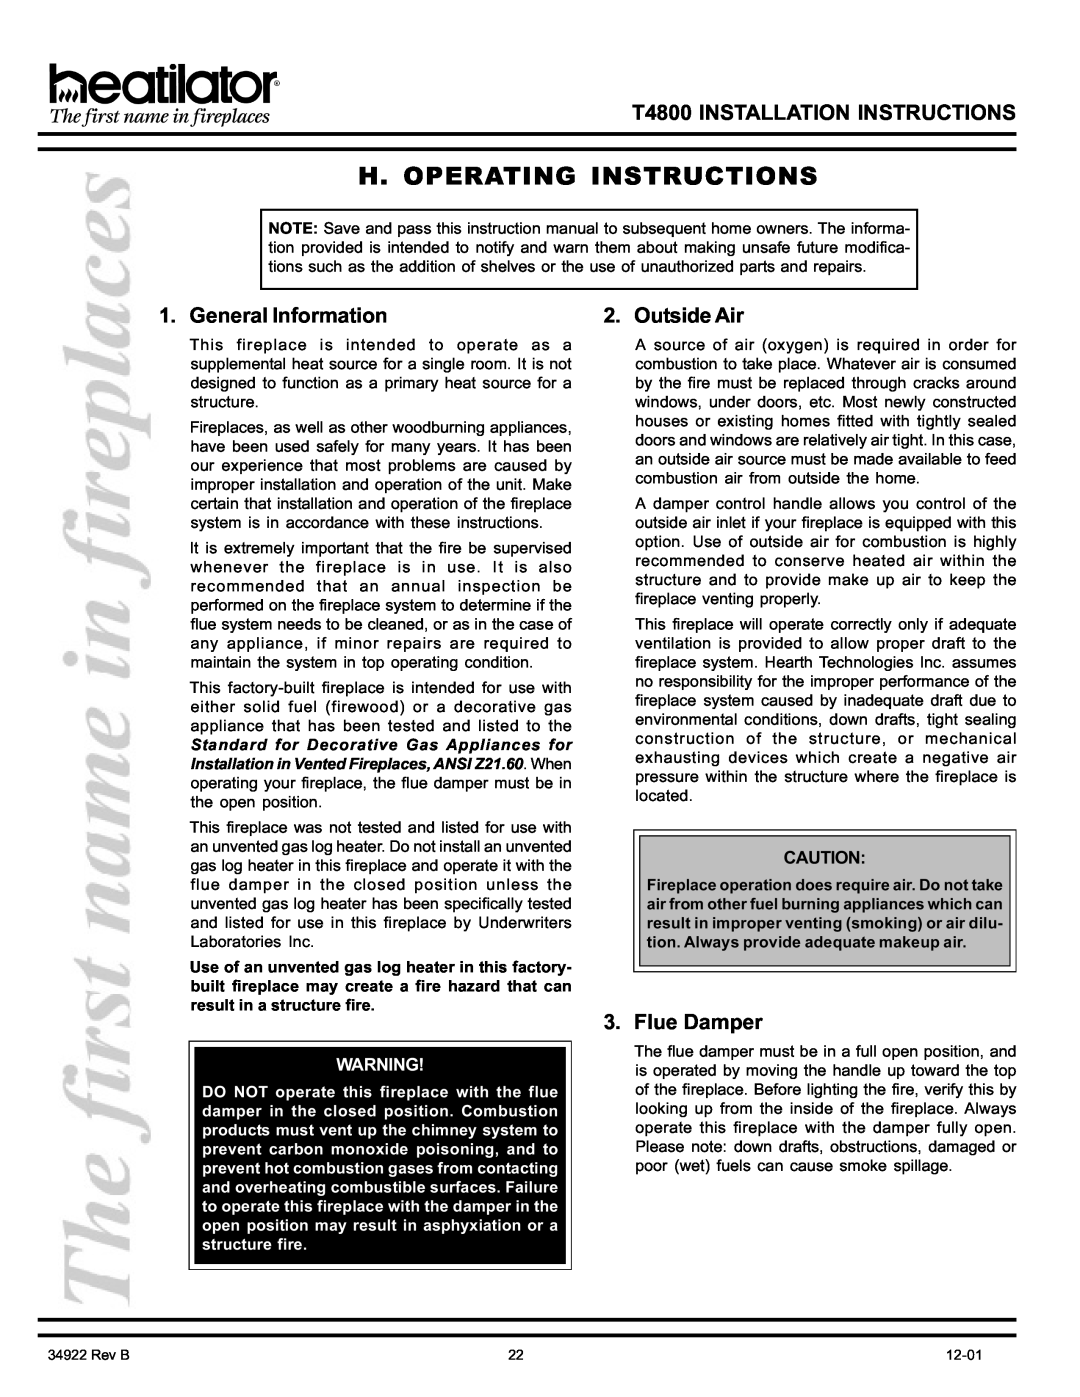 Heatiator H. Operating Instructions, General Information, Outside Air, Flue Damper, T4800 INSTALLATION INSTRUCTIONS 